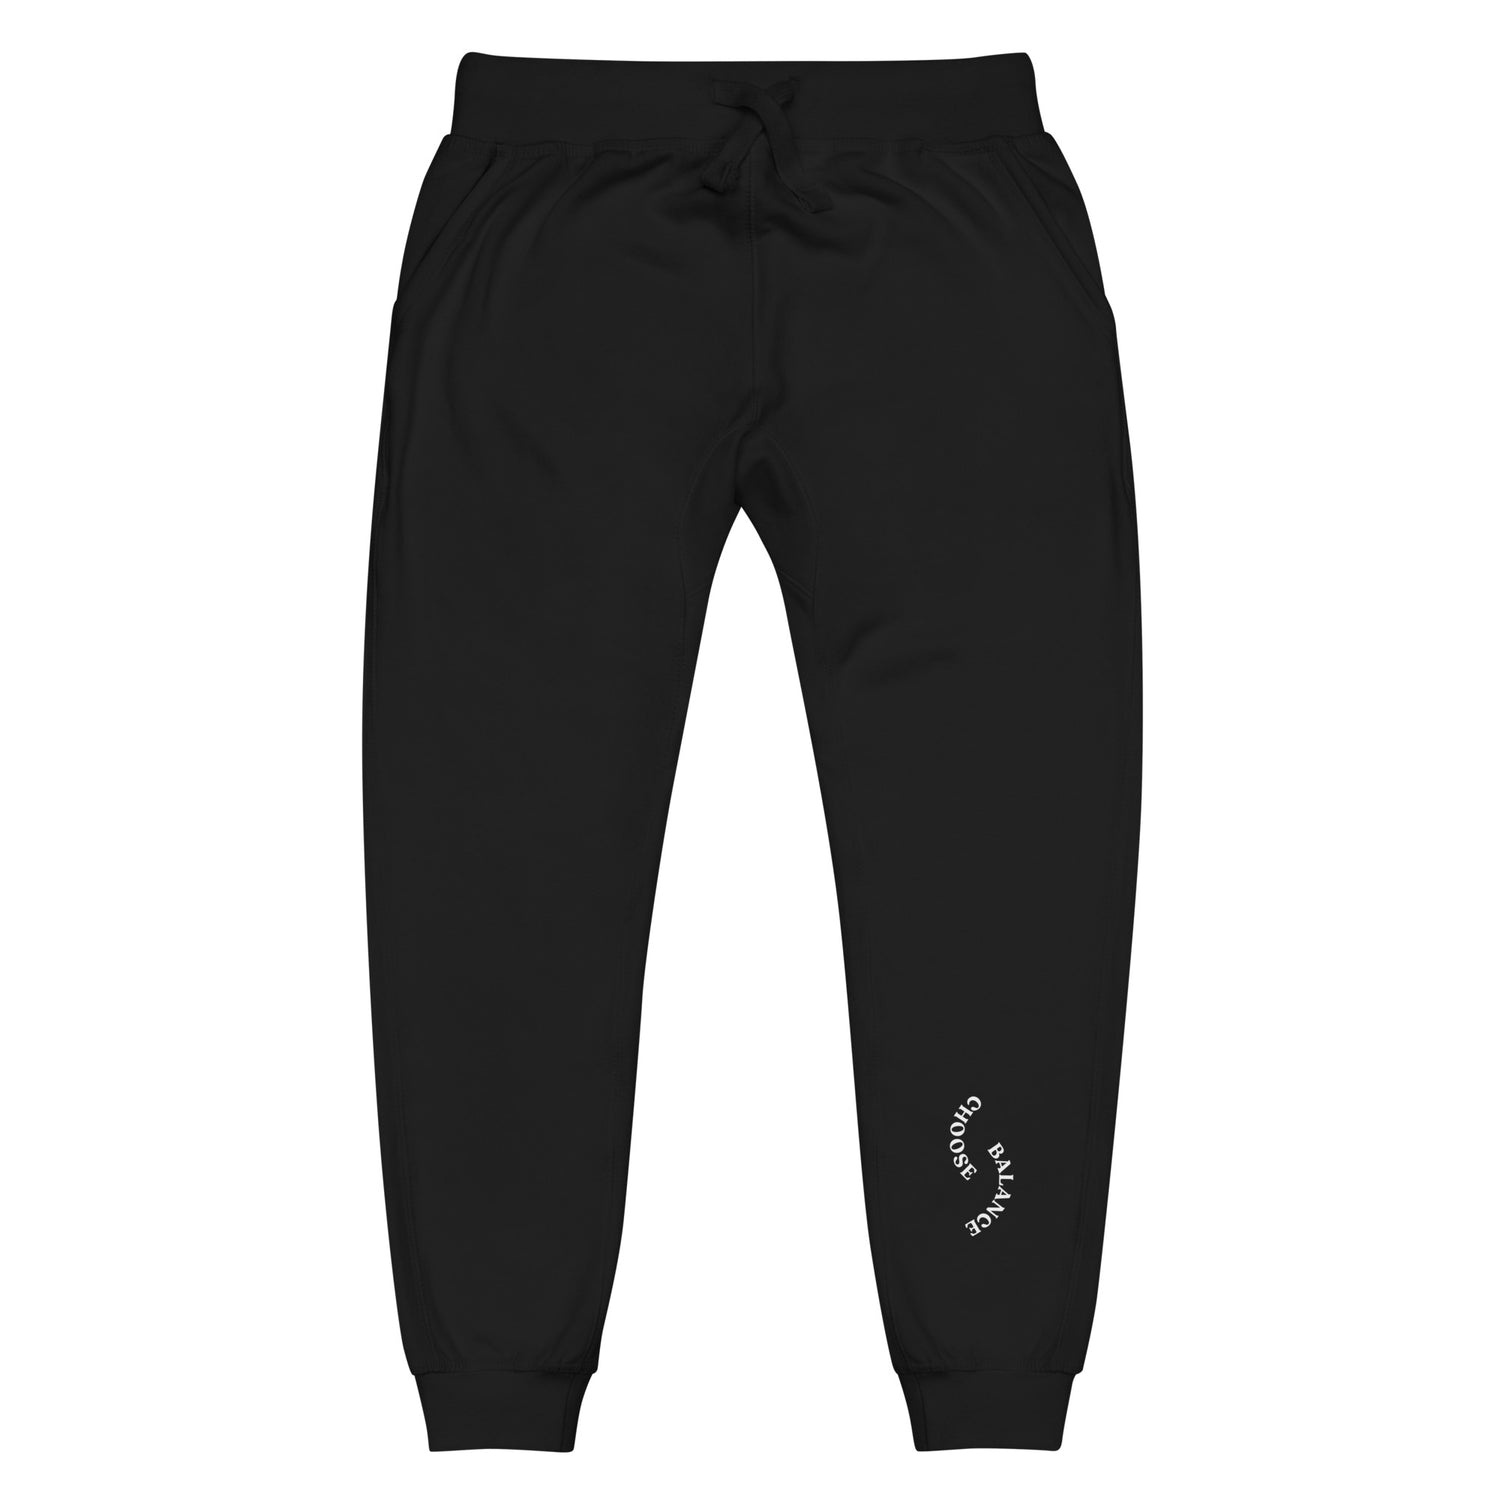 Black Sweatpants that helps with mental health "Choose Balance"